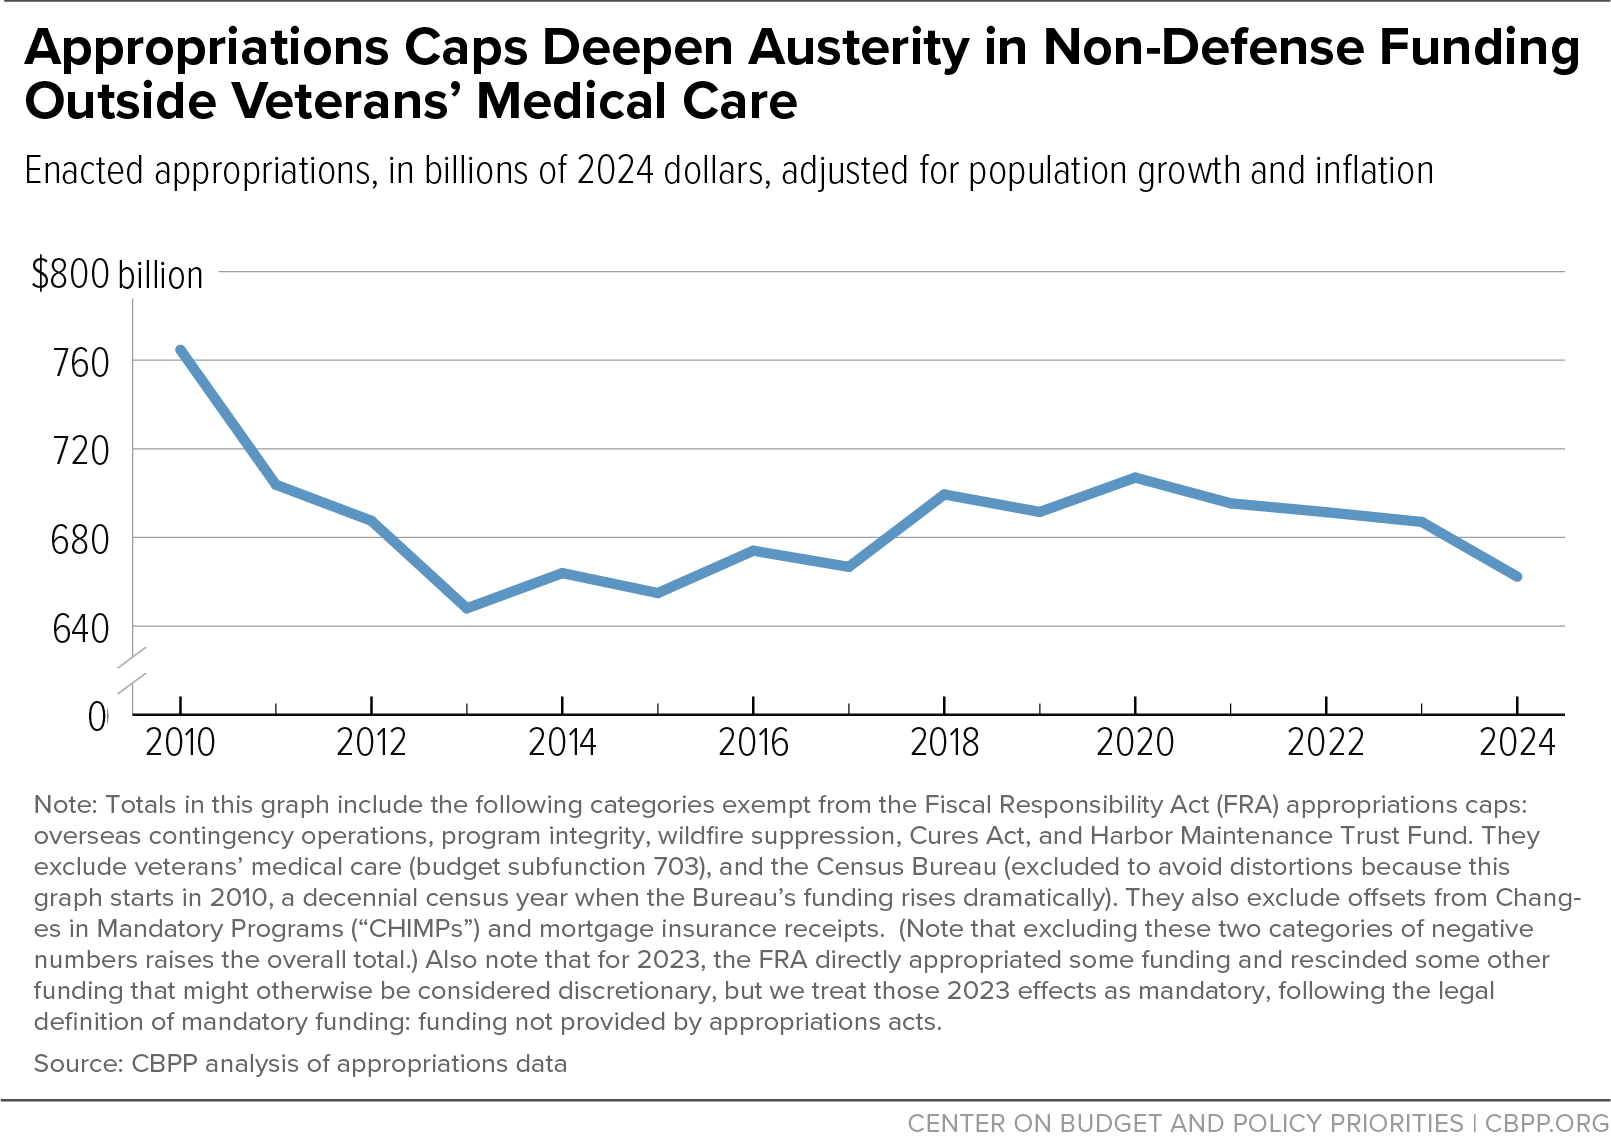 Appropriations Caps Deepen Austerity in Non-Defense Funding Outside Veterans' Medical Care